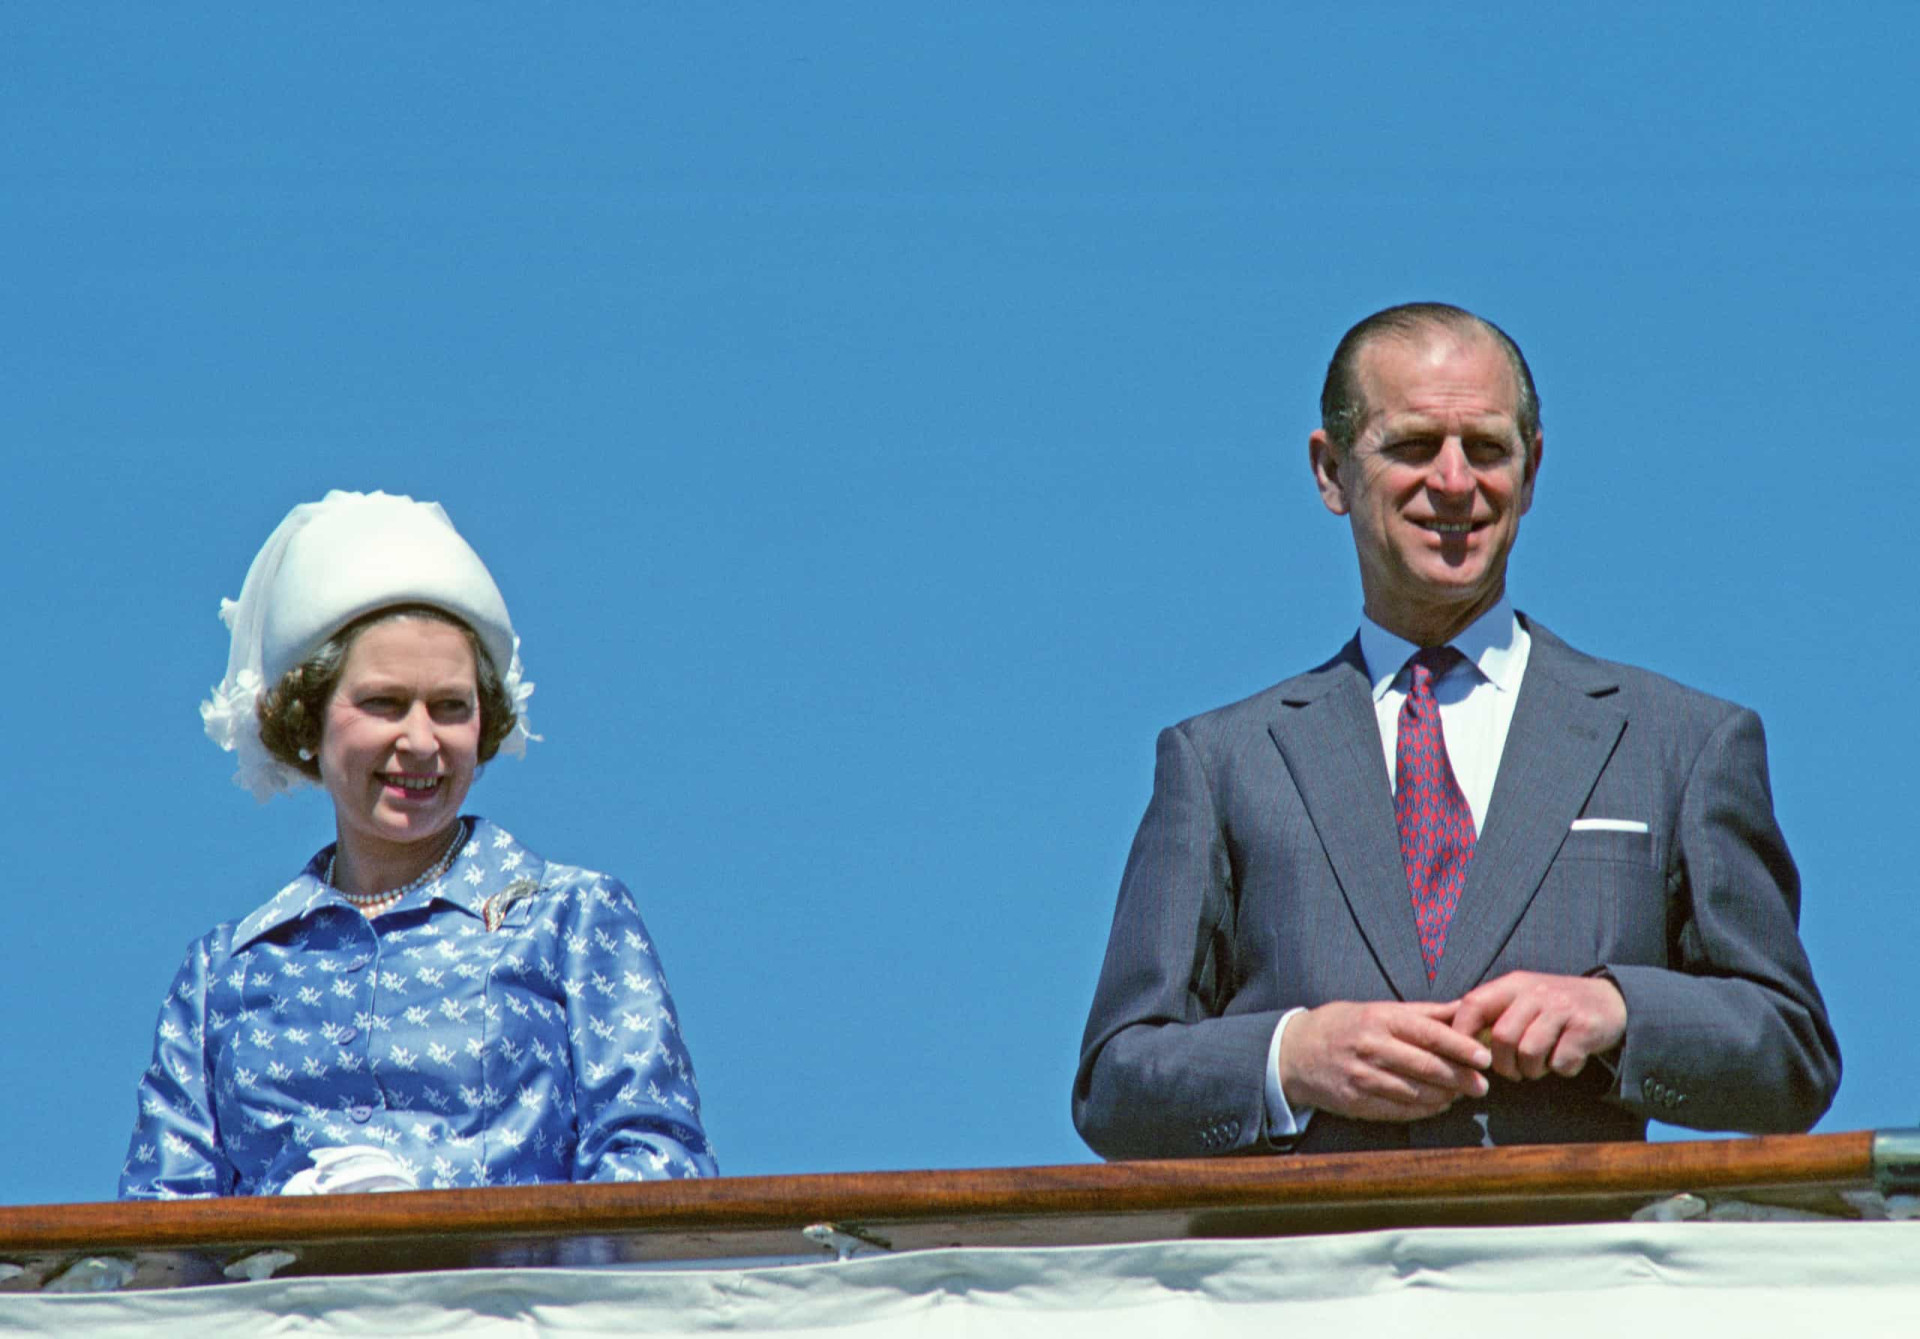 <p>A six-nation tour of the Gulf States, the first ever by a female Head of State, took place in early 1979. The Queen and Prince Philip flew into the region before setting sail from Kuwait aboard <em>Britannia</em>.</p><p><a href="https://www.msn.com/en-us/community/channel/vid-7xx8mnucu55yw63we9va2gwr7uihbxwc68fxqp25x6tg4ftibpra?cvid=94631541bc0f4f89bfd59158d696ad7e">Follow us and access great exclusive content every day</a></p>